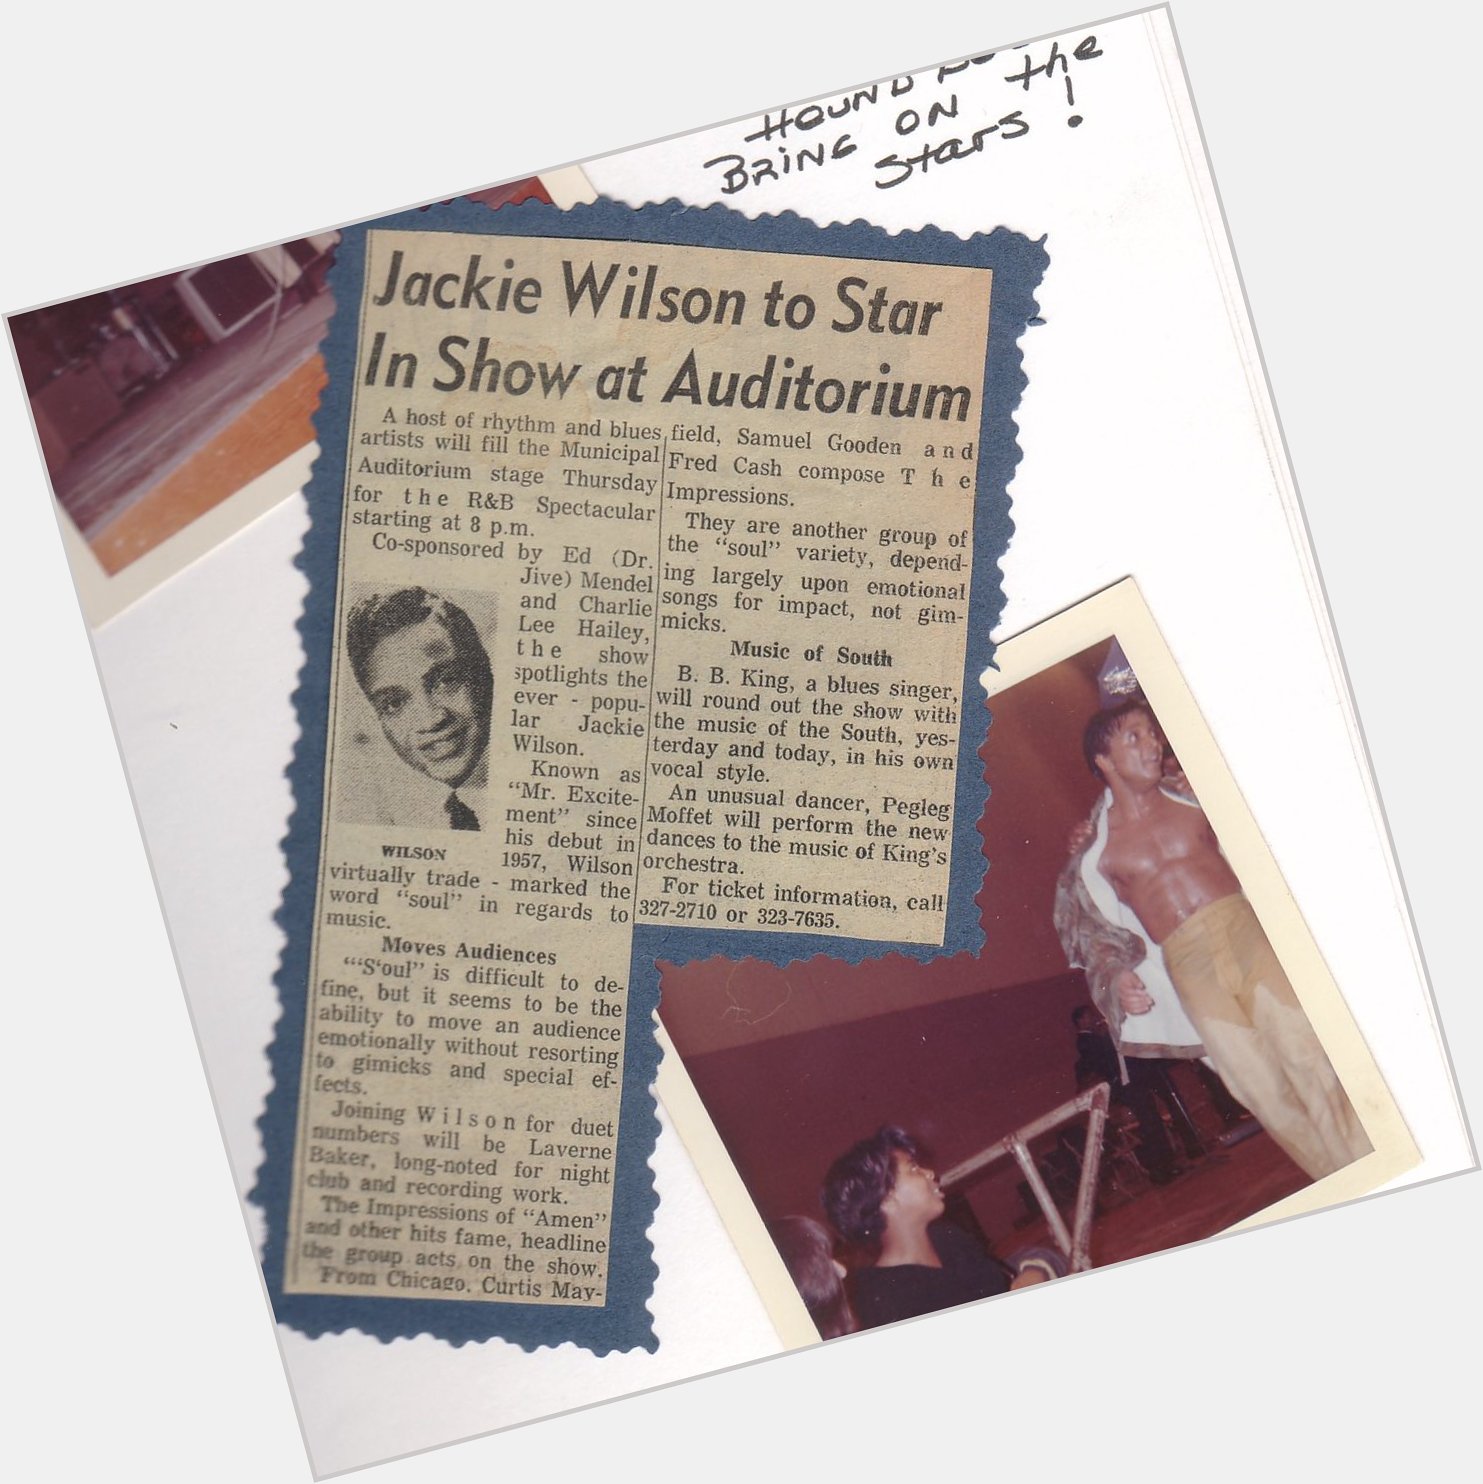 Happy Birthday Jackie Wilson. That must have been a memorable show in Columbus GA! 